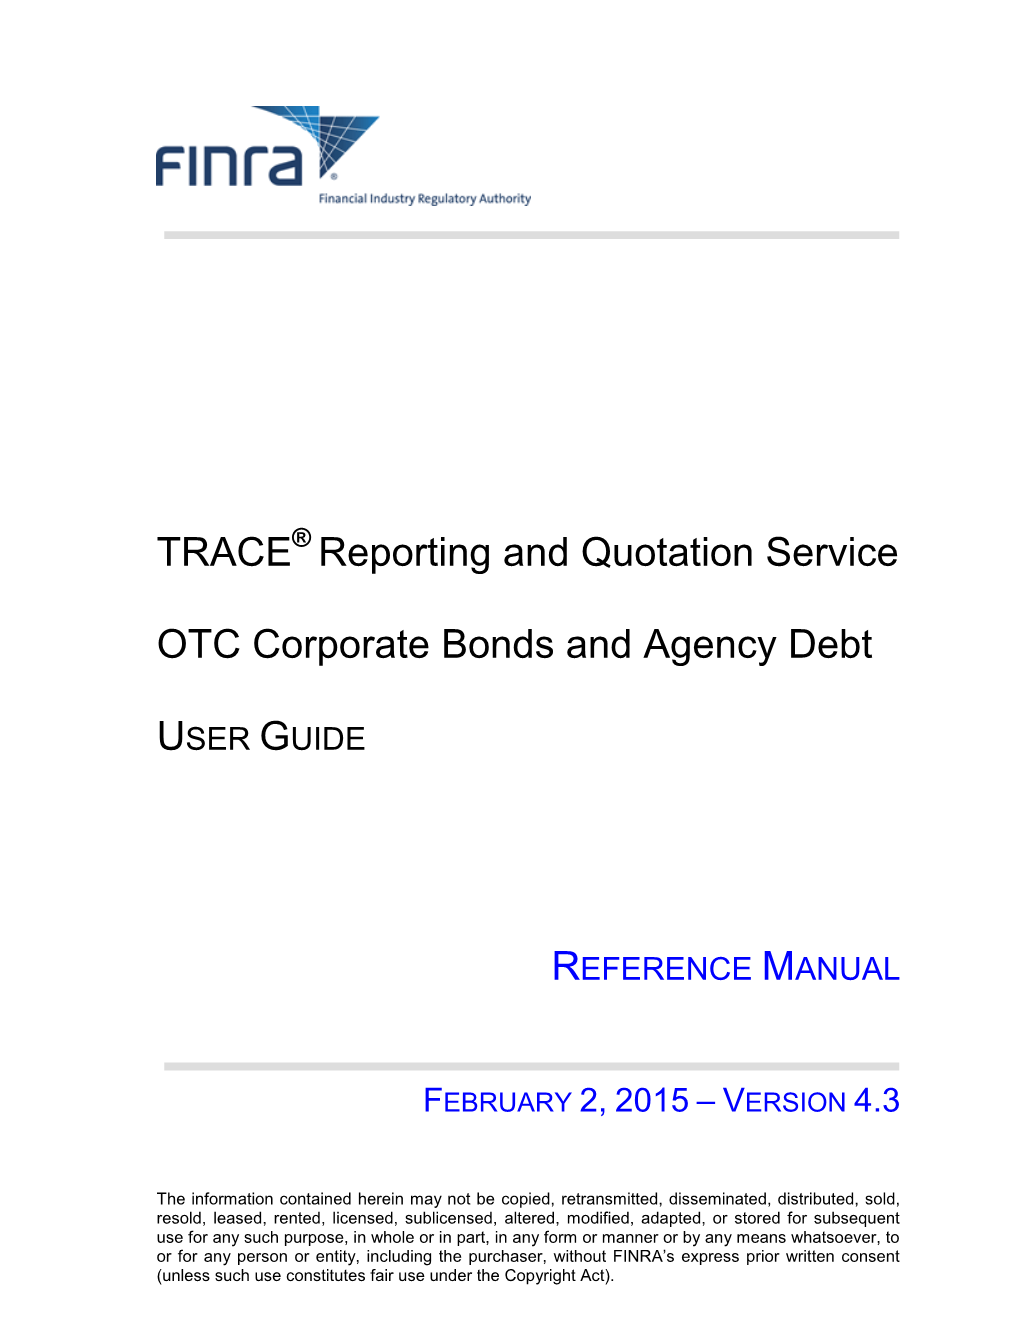 TRACE – OTC Corporate Bonds and Agency Debt User Guide – Version